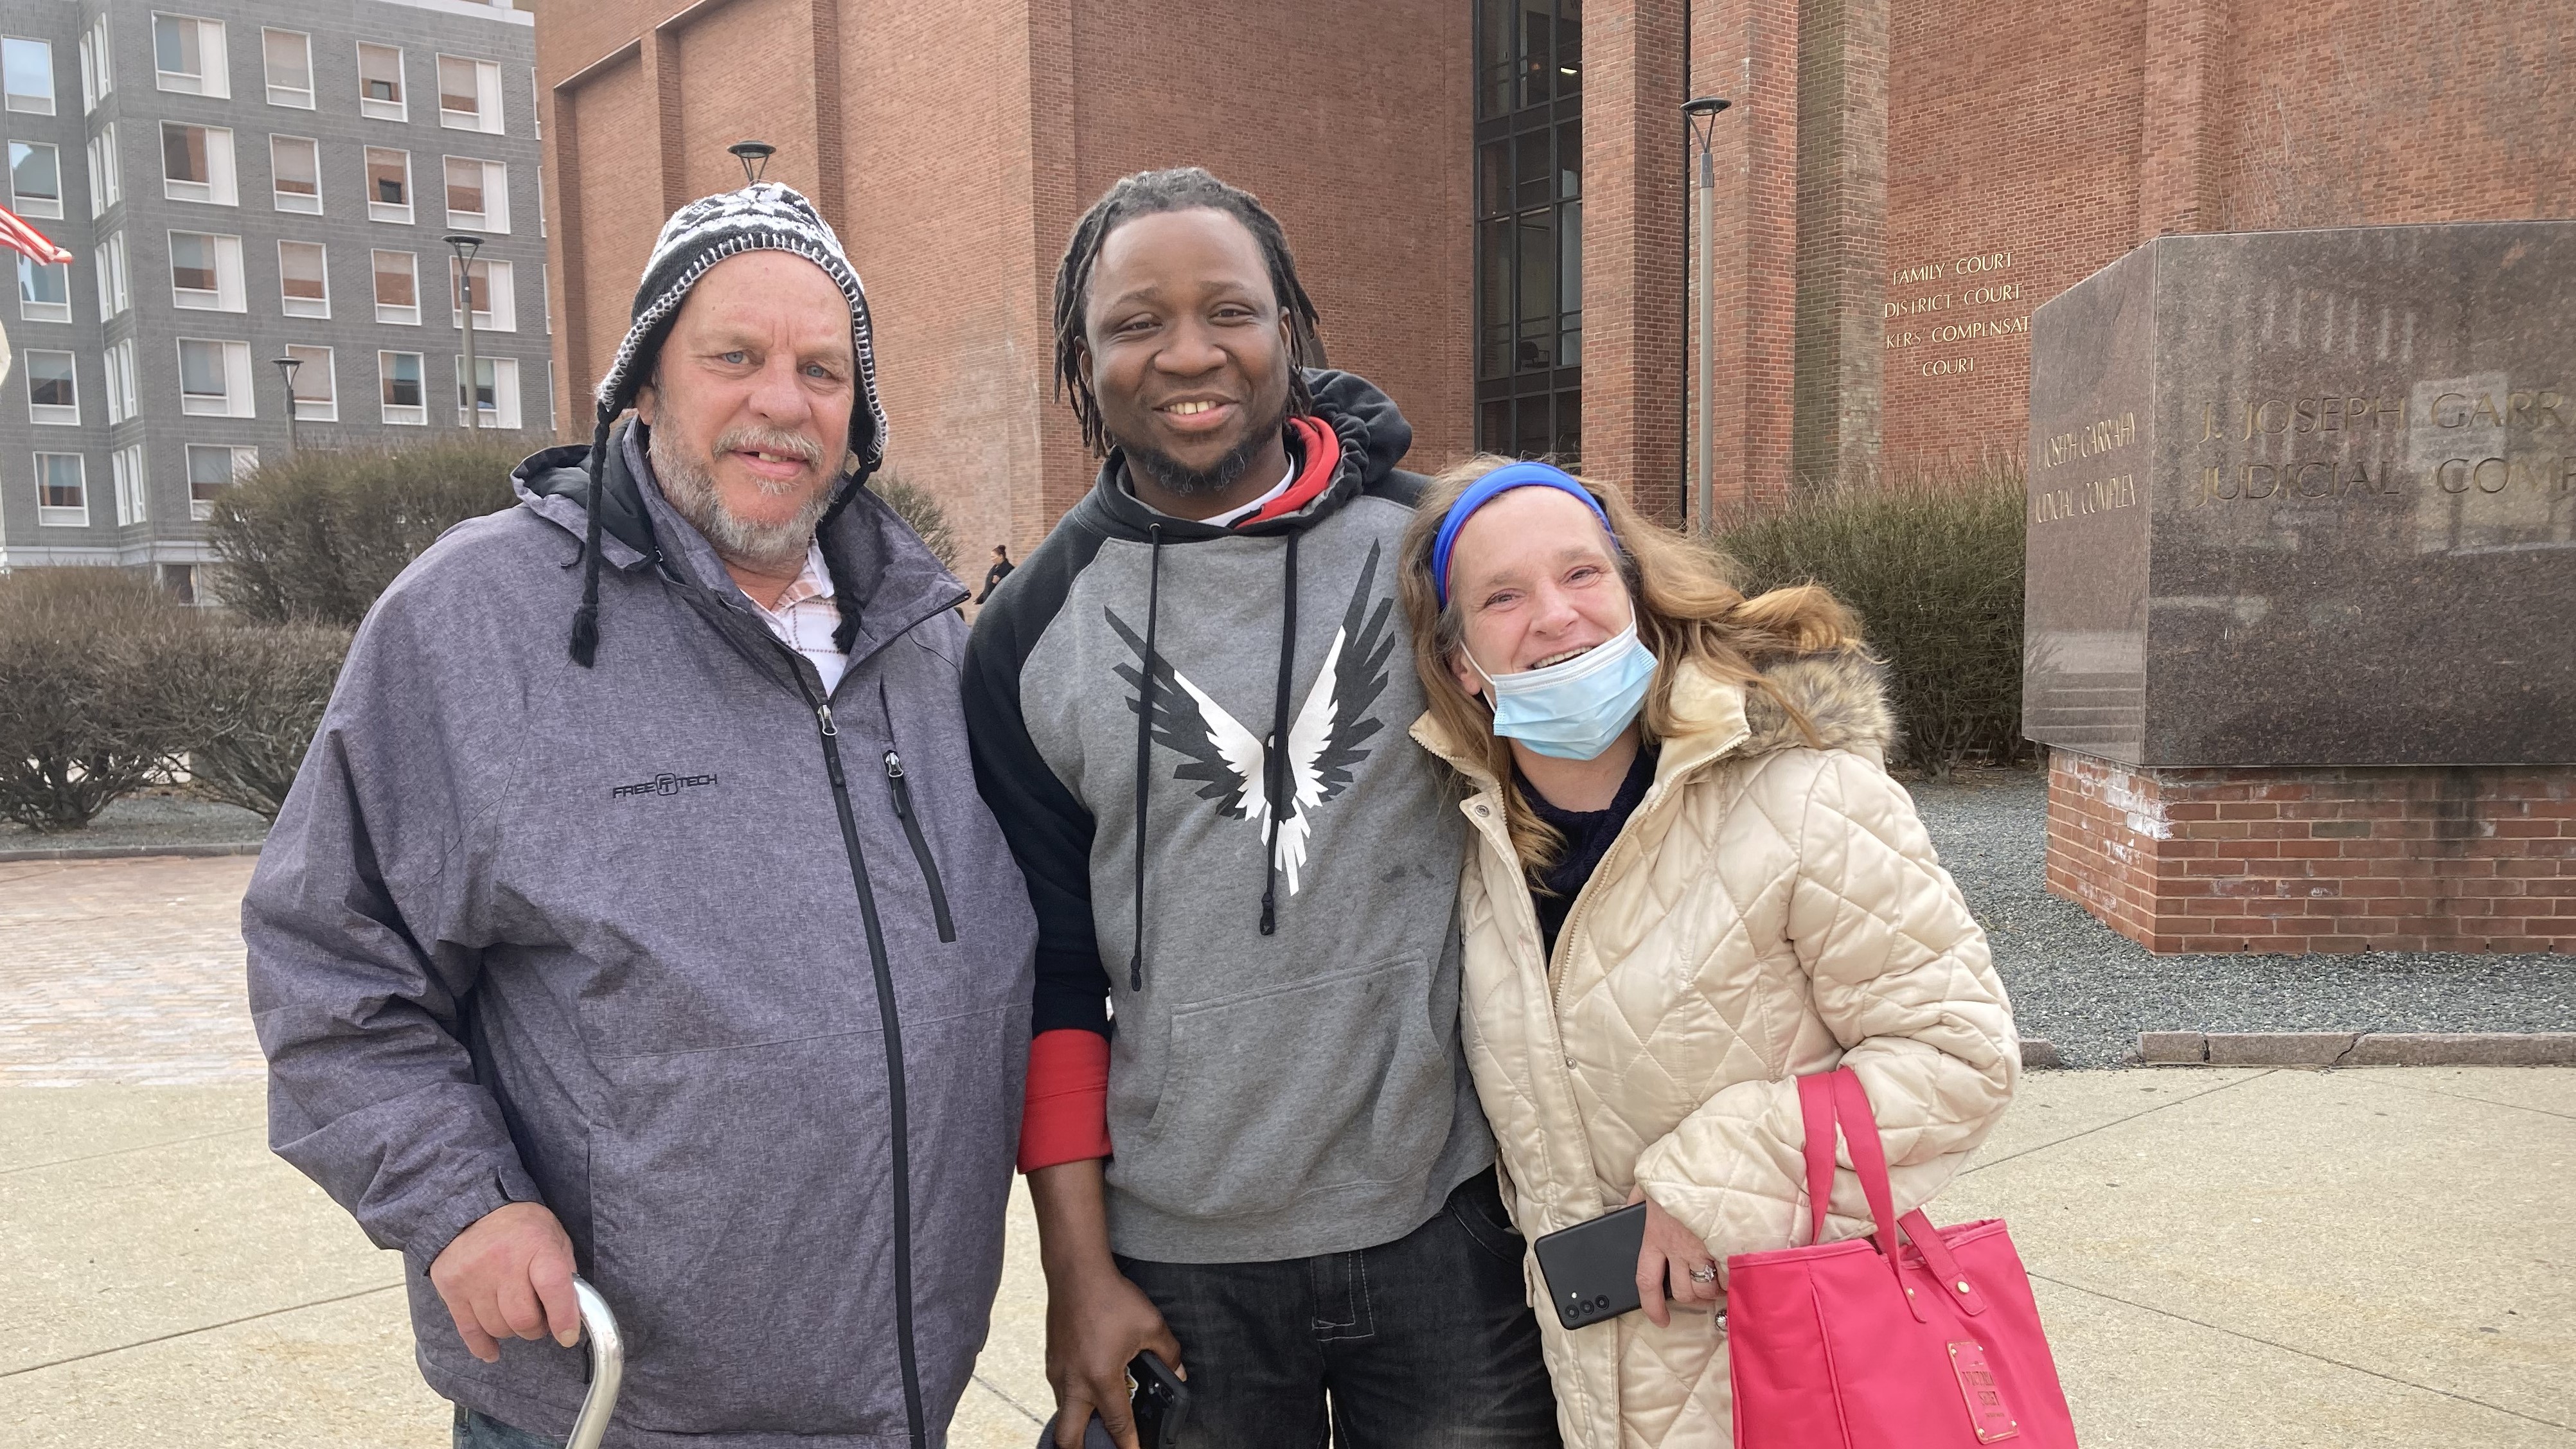 Mack Blackie (center) with William Grover and his wife, Veronica Higbie, outside the Garrahy Judicial Complex, Providence, R.I., in February 2023. The couple helped to exonerate Blackie.